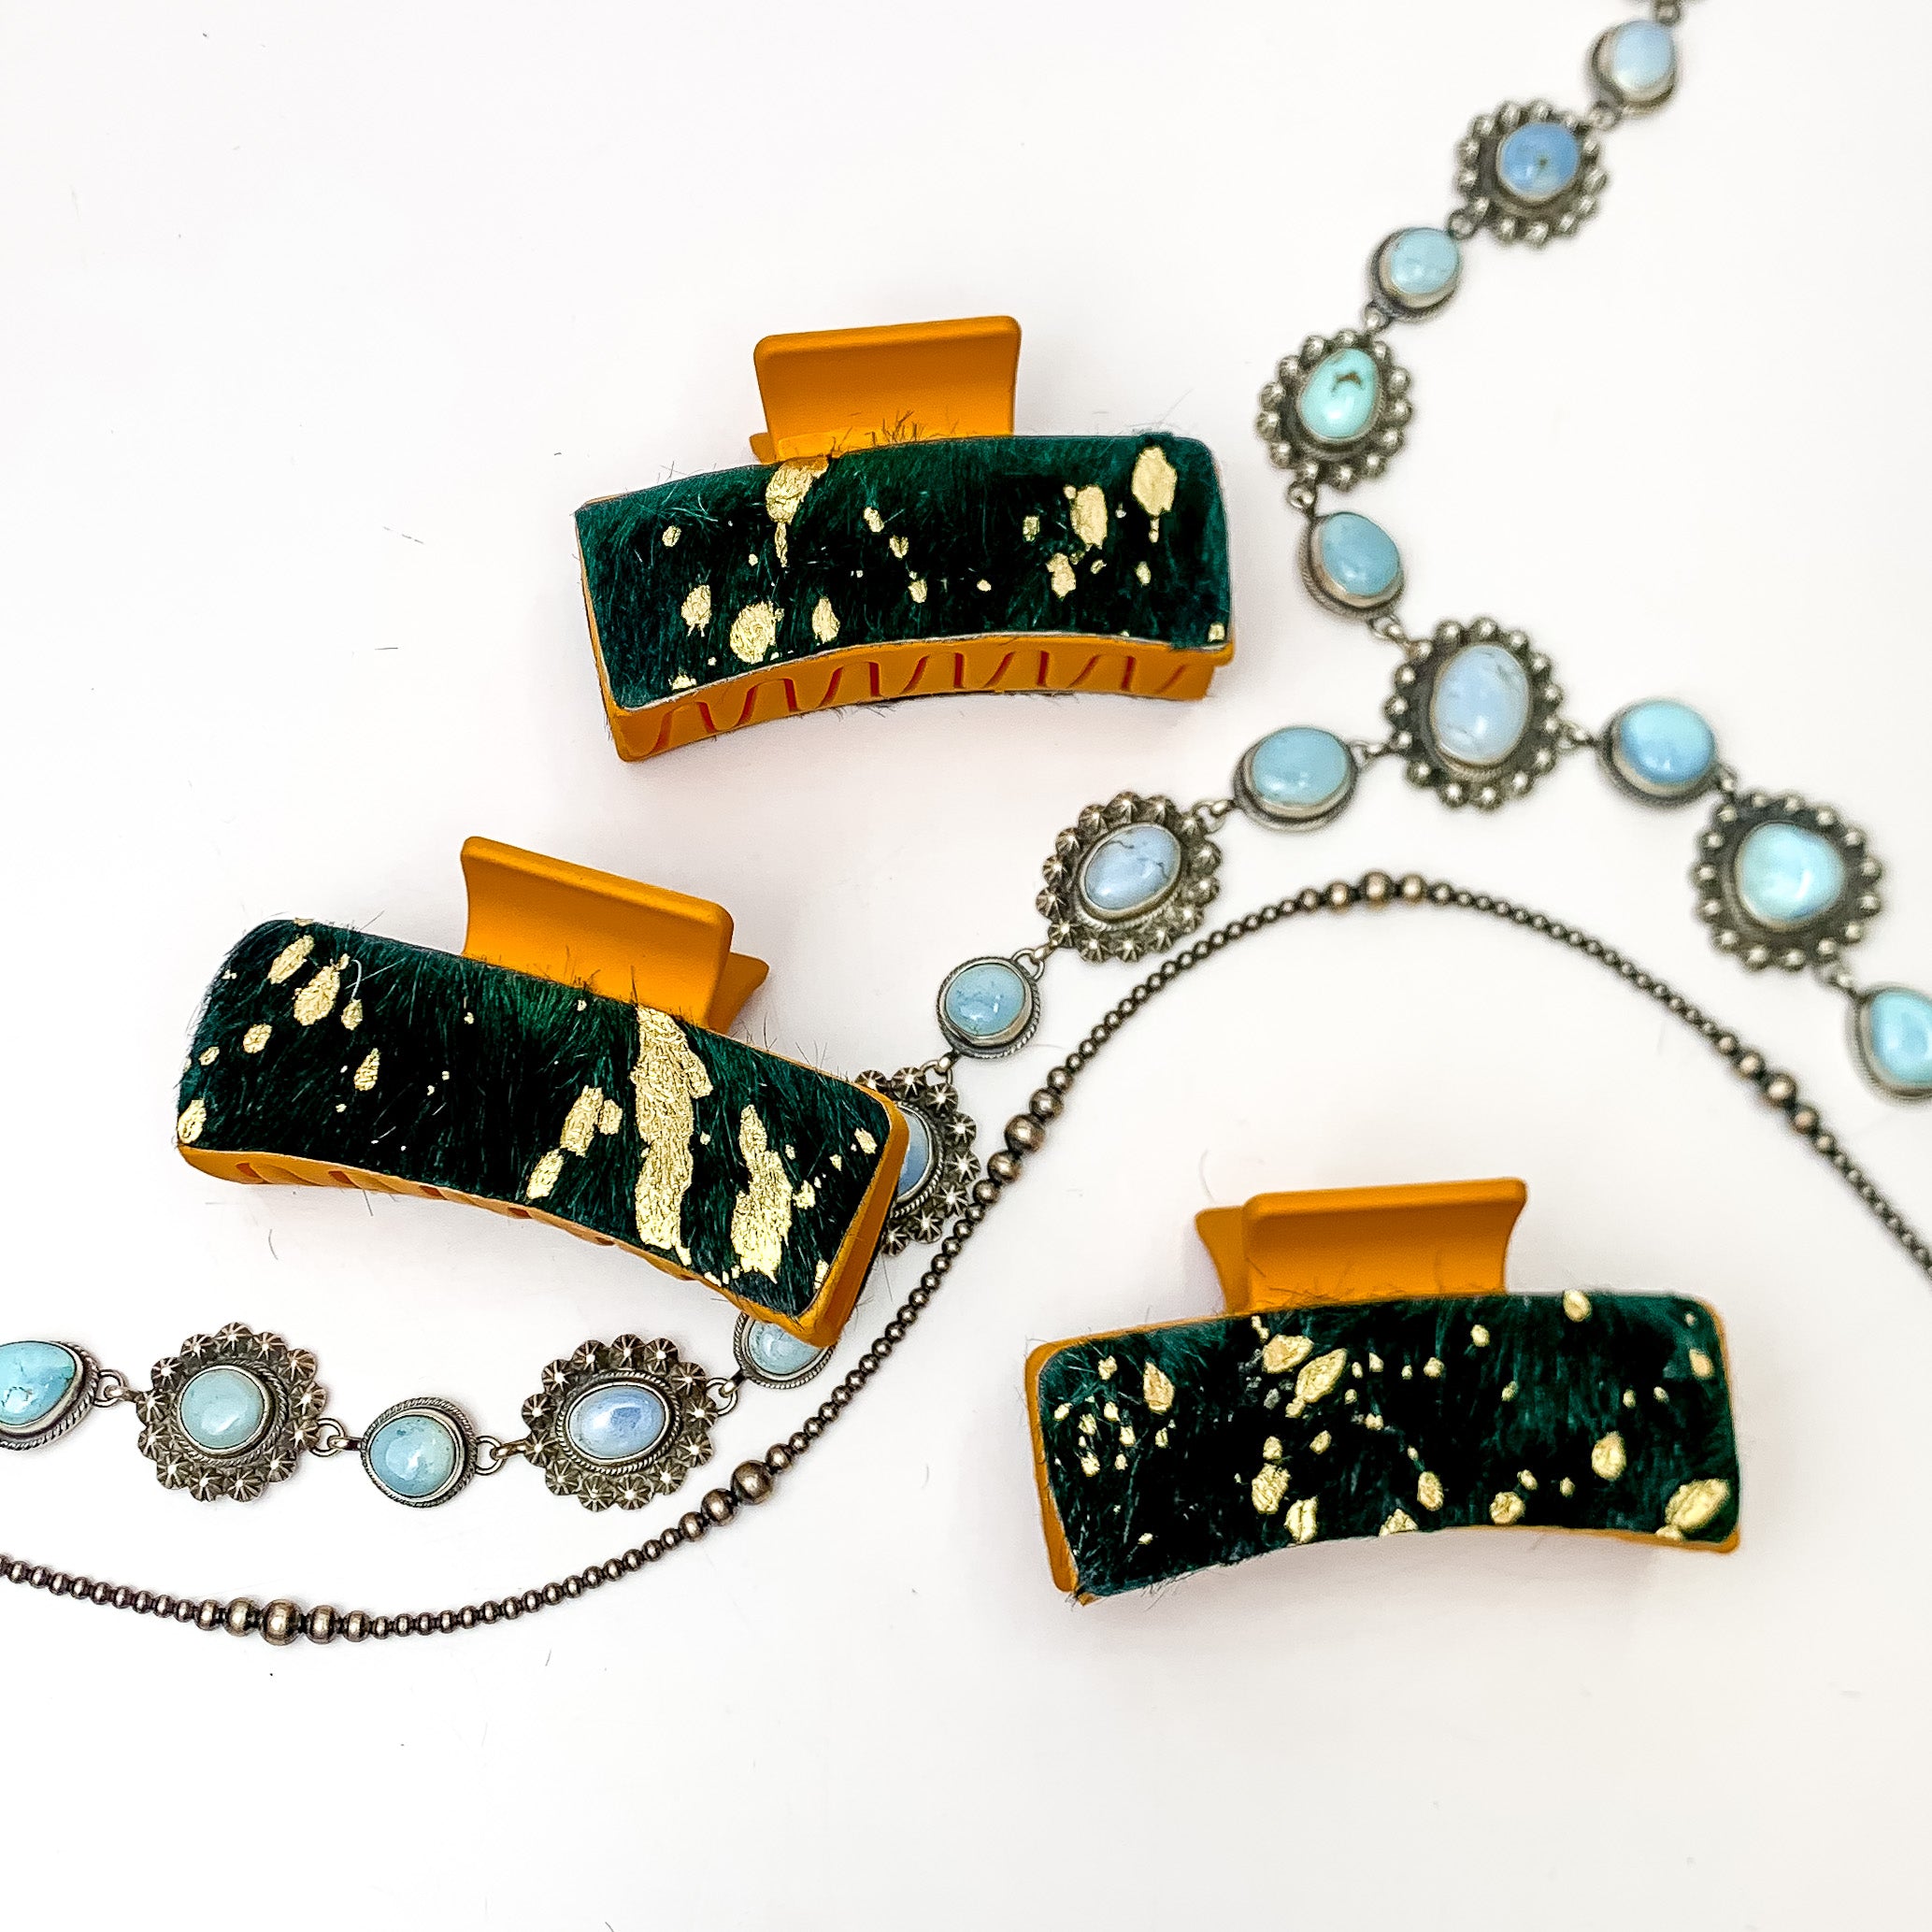 Pictured are three orange hair clips with green and gold hide patches. These earrings are pictured on a white background with silver necklaces under the clips. 